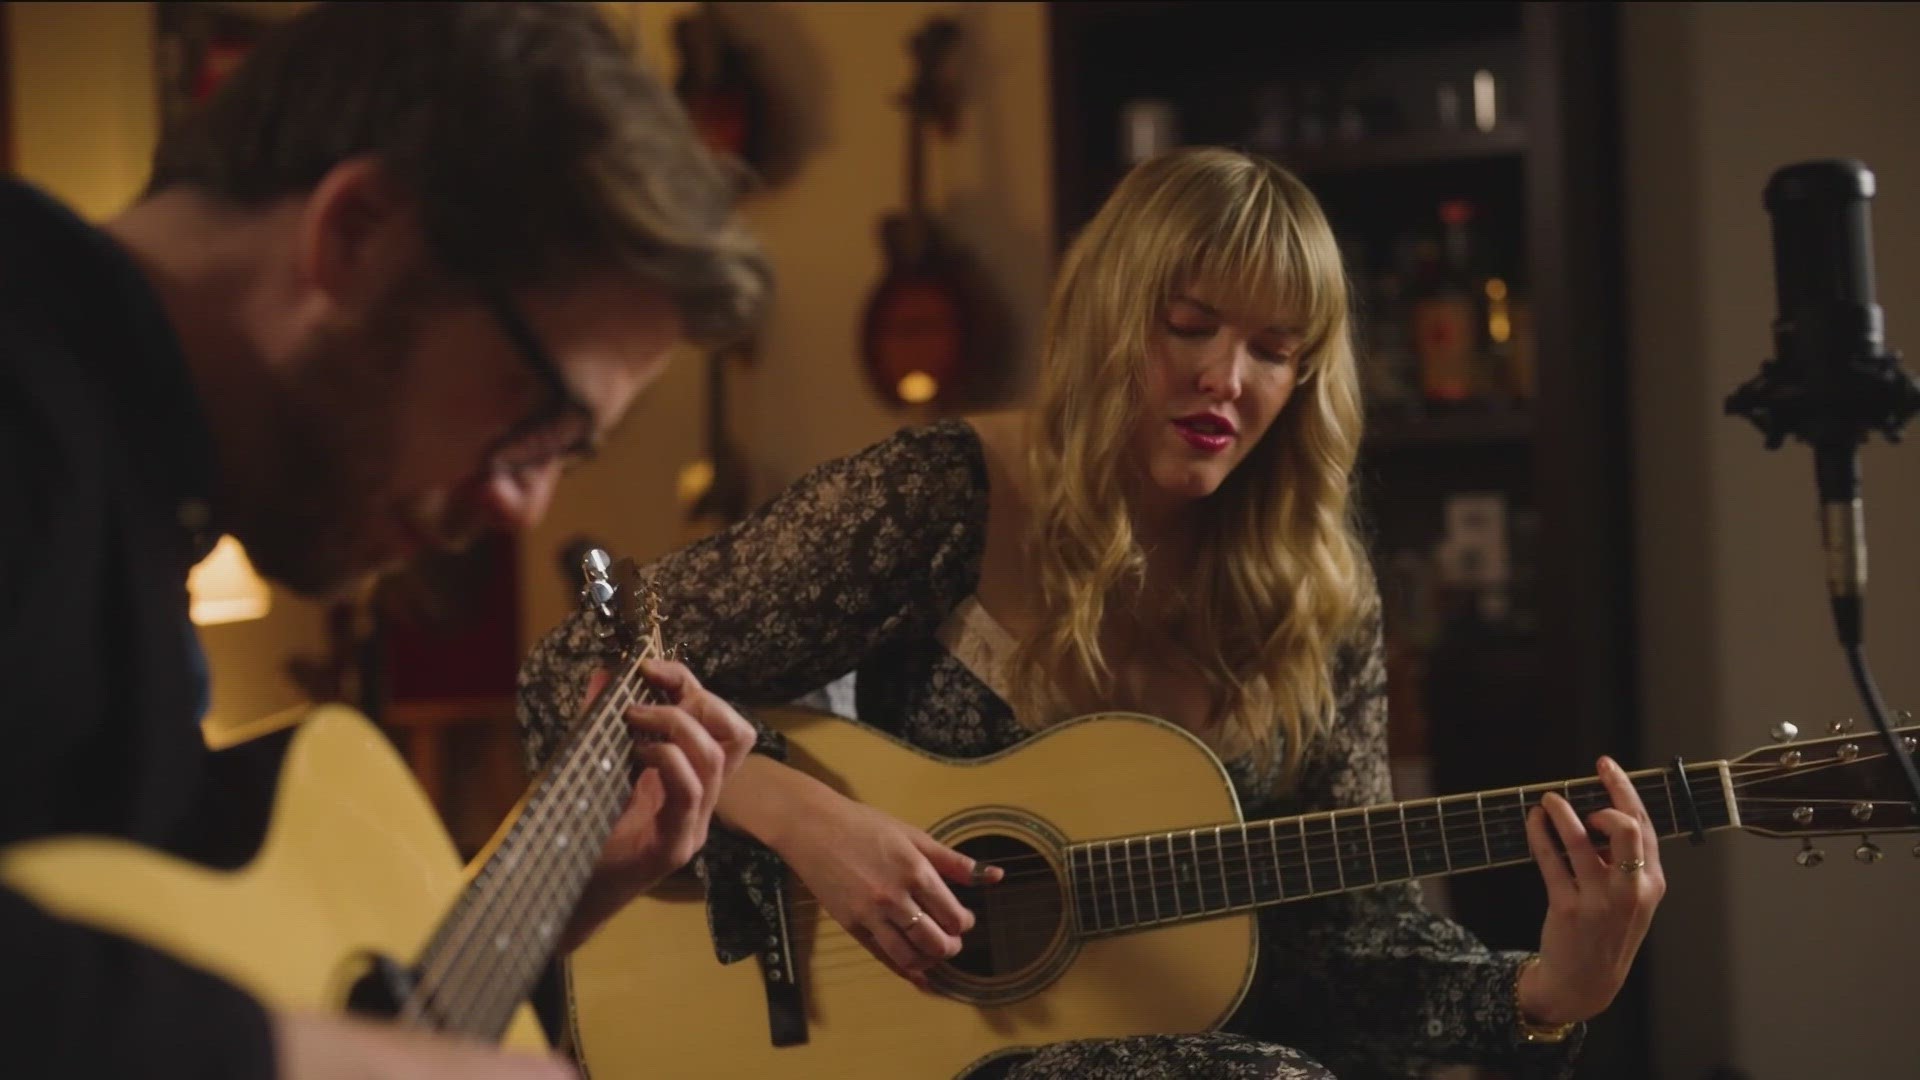 Ashley Campbell gives Idaho Today a sneak preview of her song from her new album.